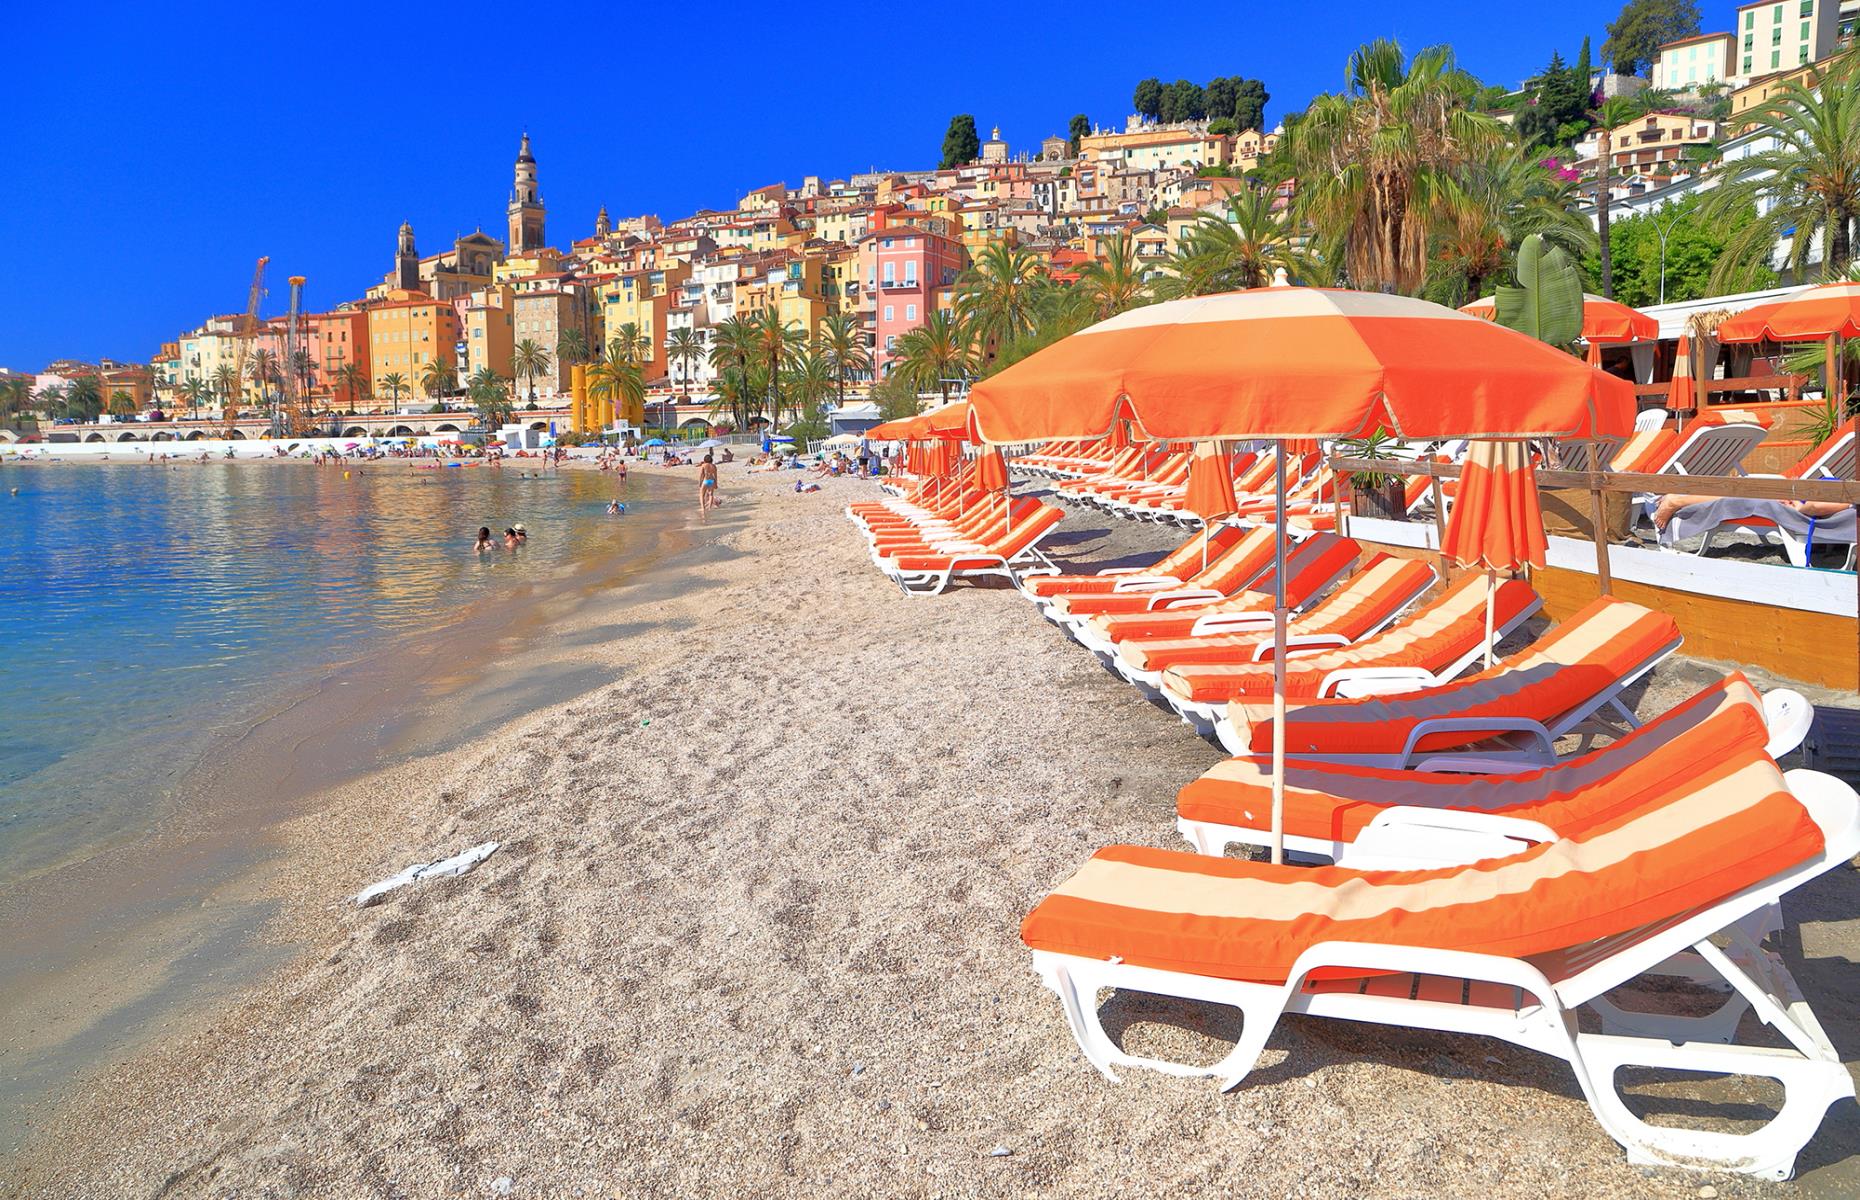 For the British, the lure of sunnier climes and improved train links with the UK meant that the French Riviera and Italian seaside resorts became increasingly popular holiday destinations for the wealthy by the 1920s. When travel became cheaper towards the end of the 20th century, escaping on a summer holiday opened up possibilities to the wider population.